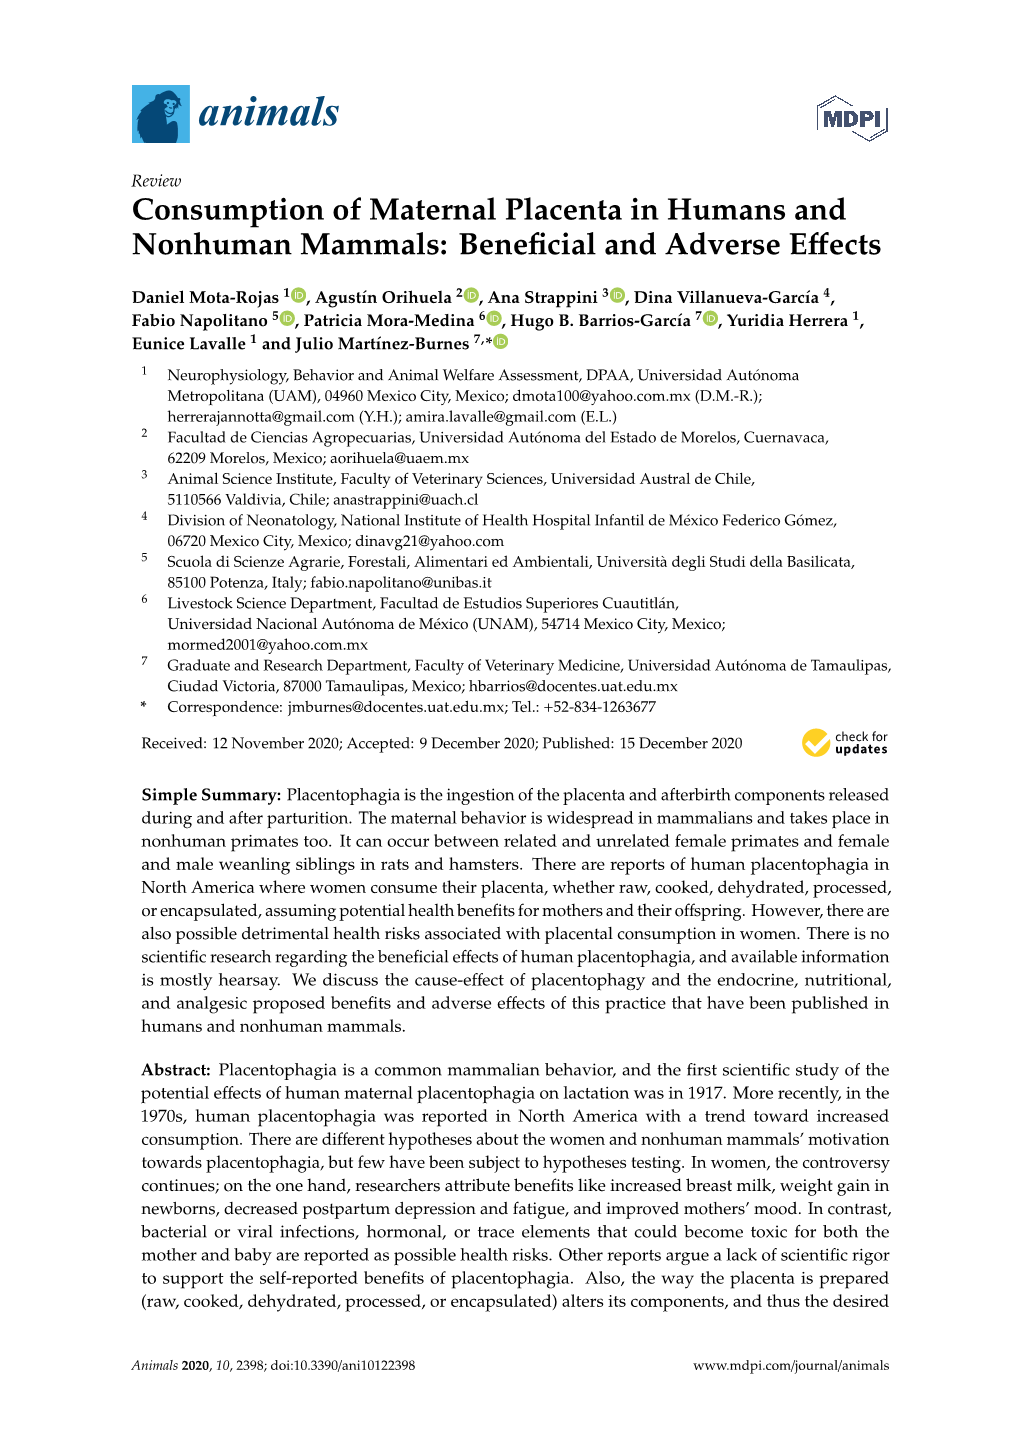 Consumption of Maternal Placenta in Humans and Nonhuman Mammals: Beneﬁcial and Adverse Eﬀects